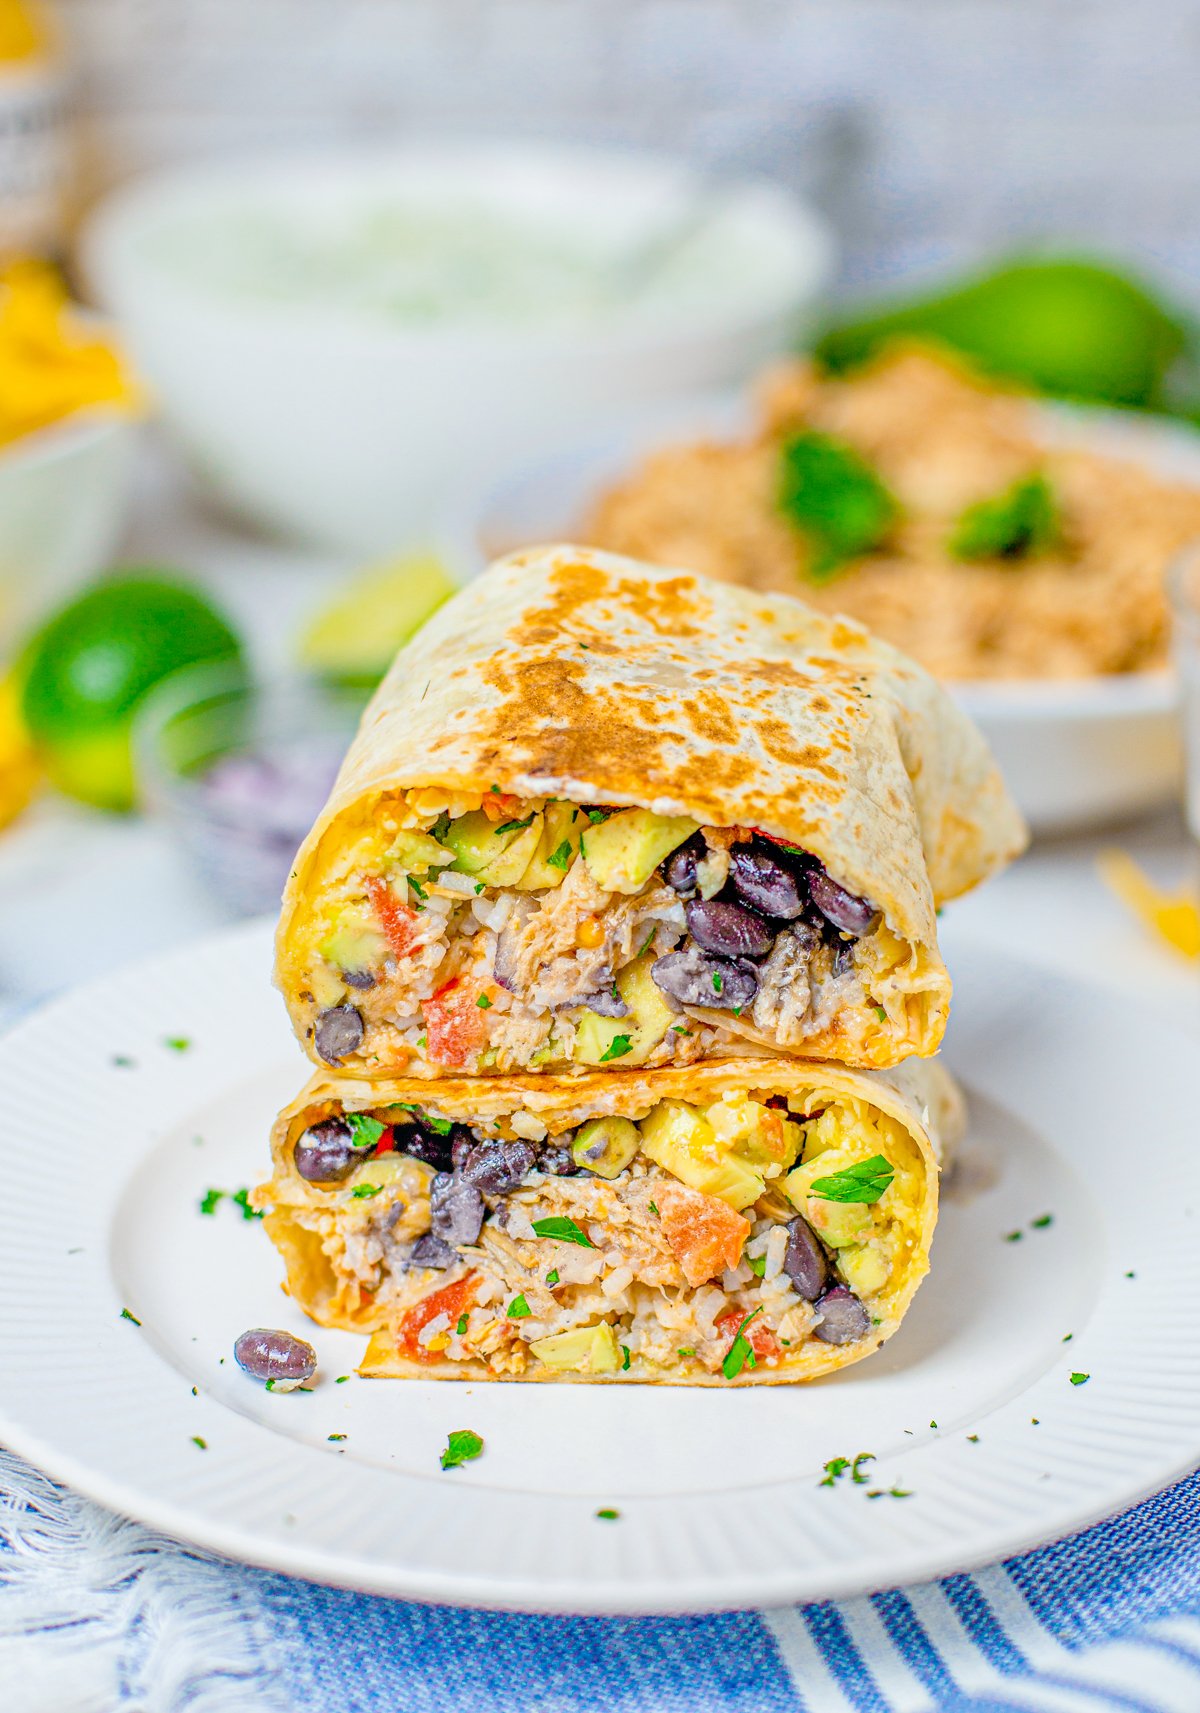 One Slow Cooker Chicken Burrito cut in half stacked on plate